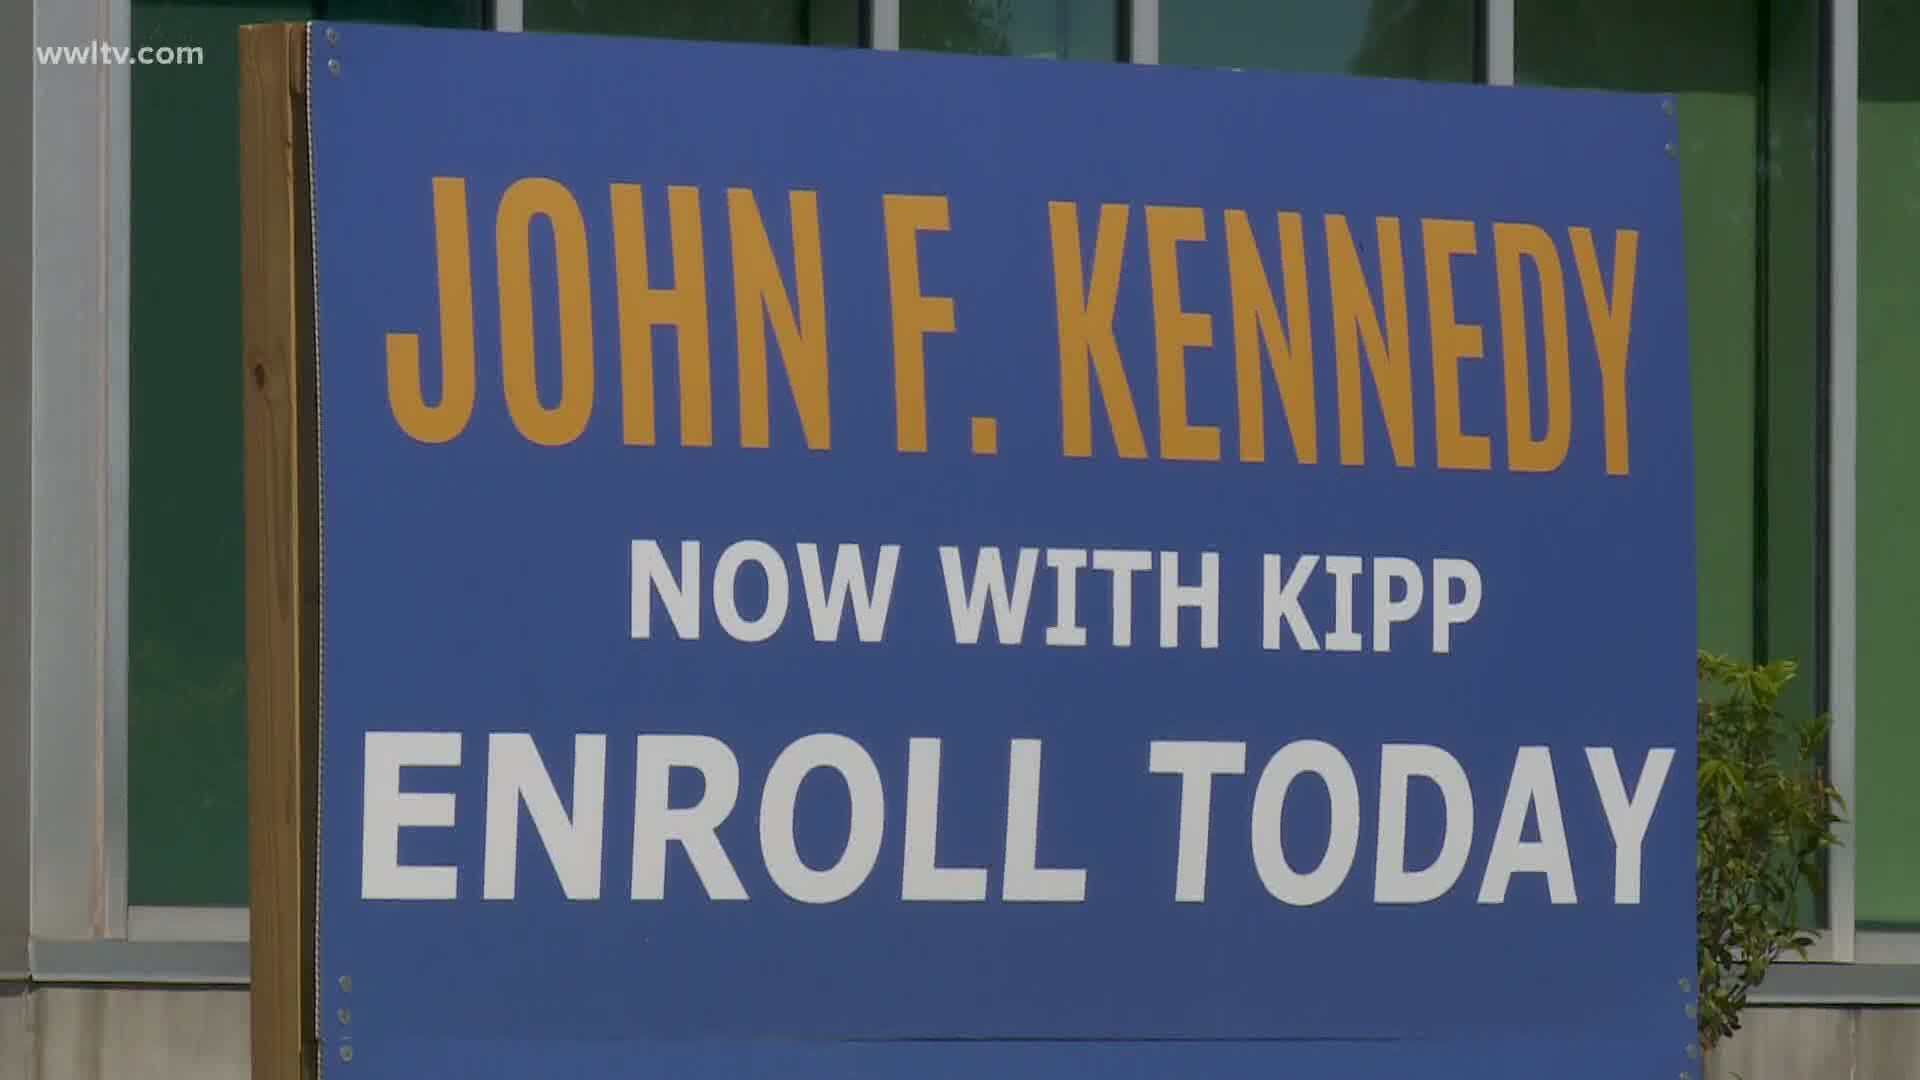 Months after completing extra work, dozens of Kennedy High seniors still couldn’t get their final transcript to graduate.